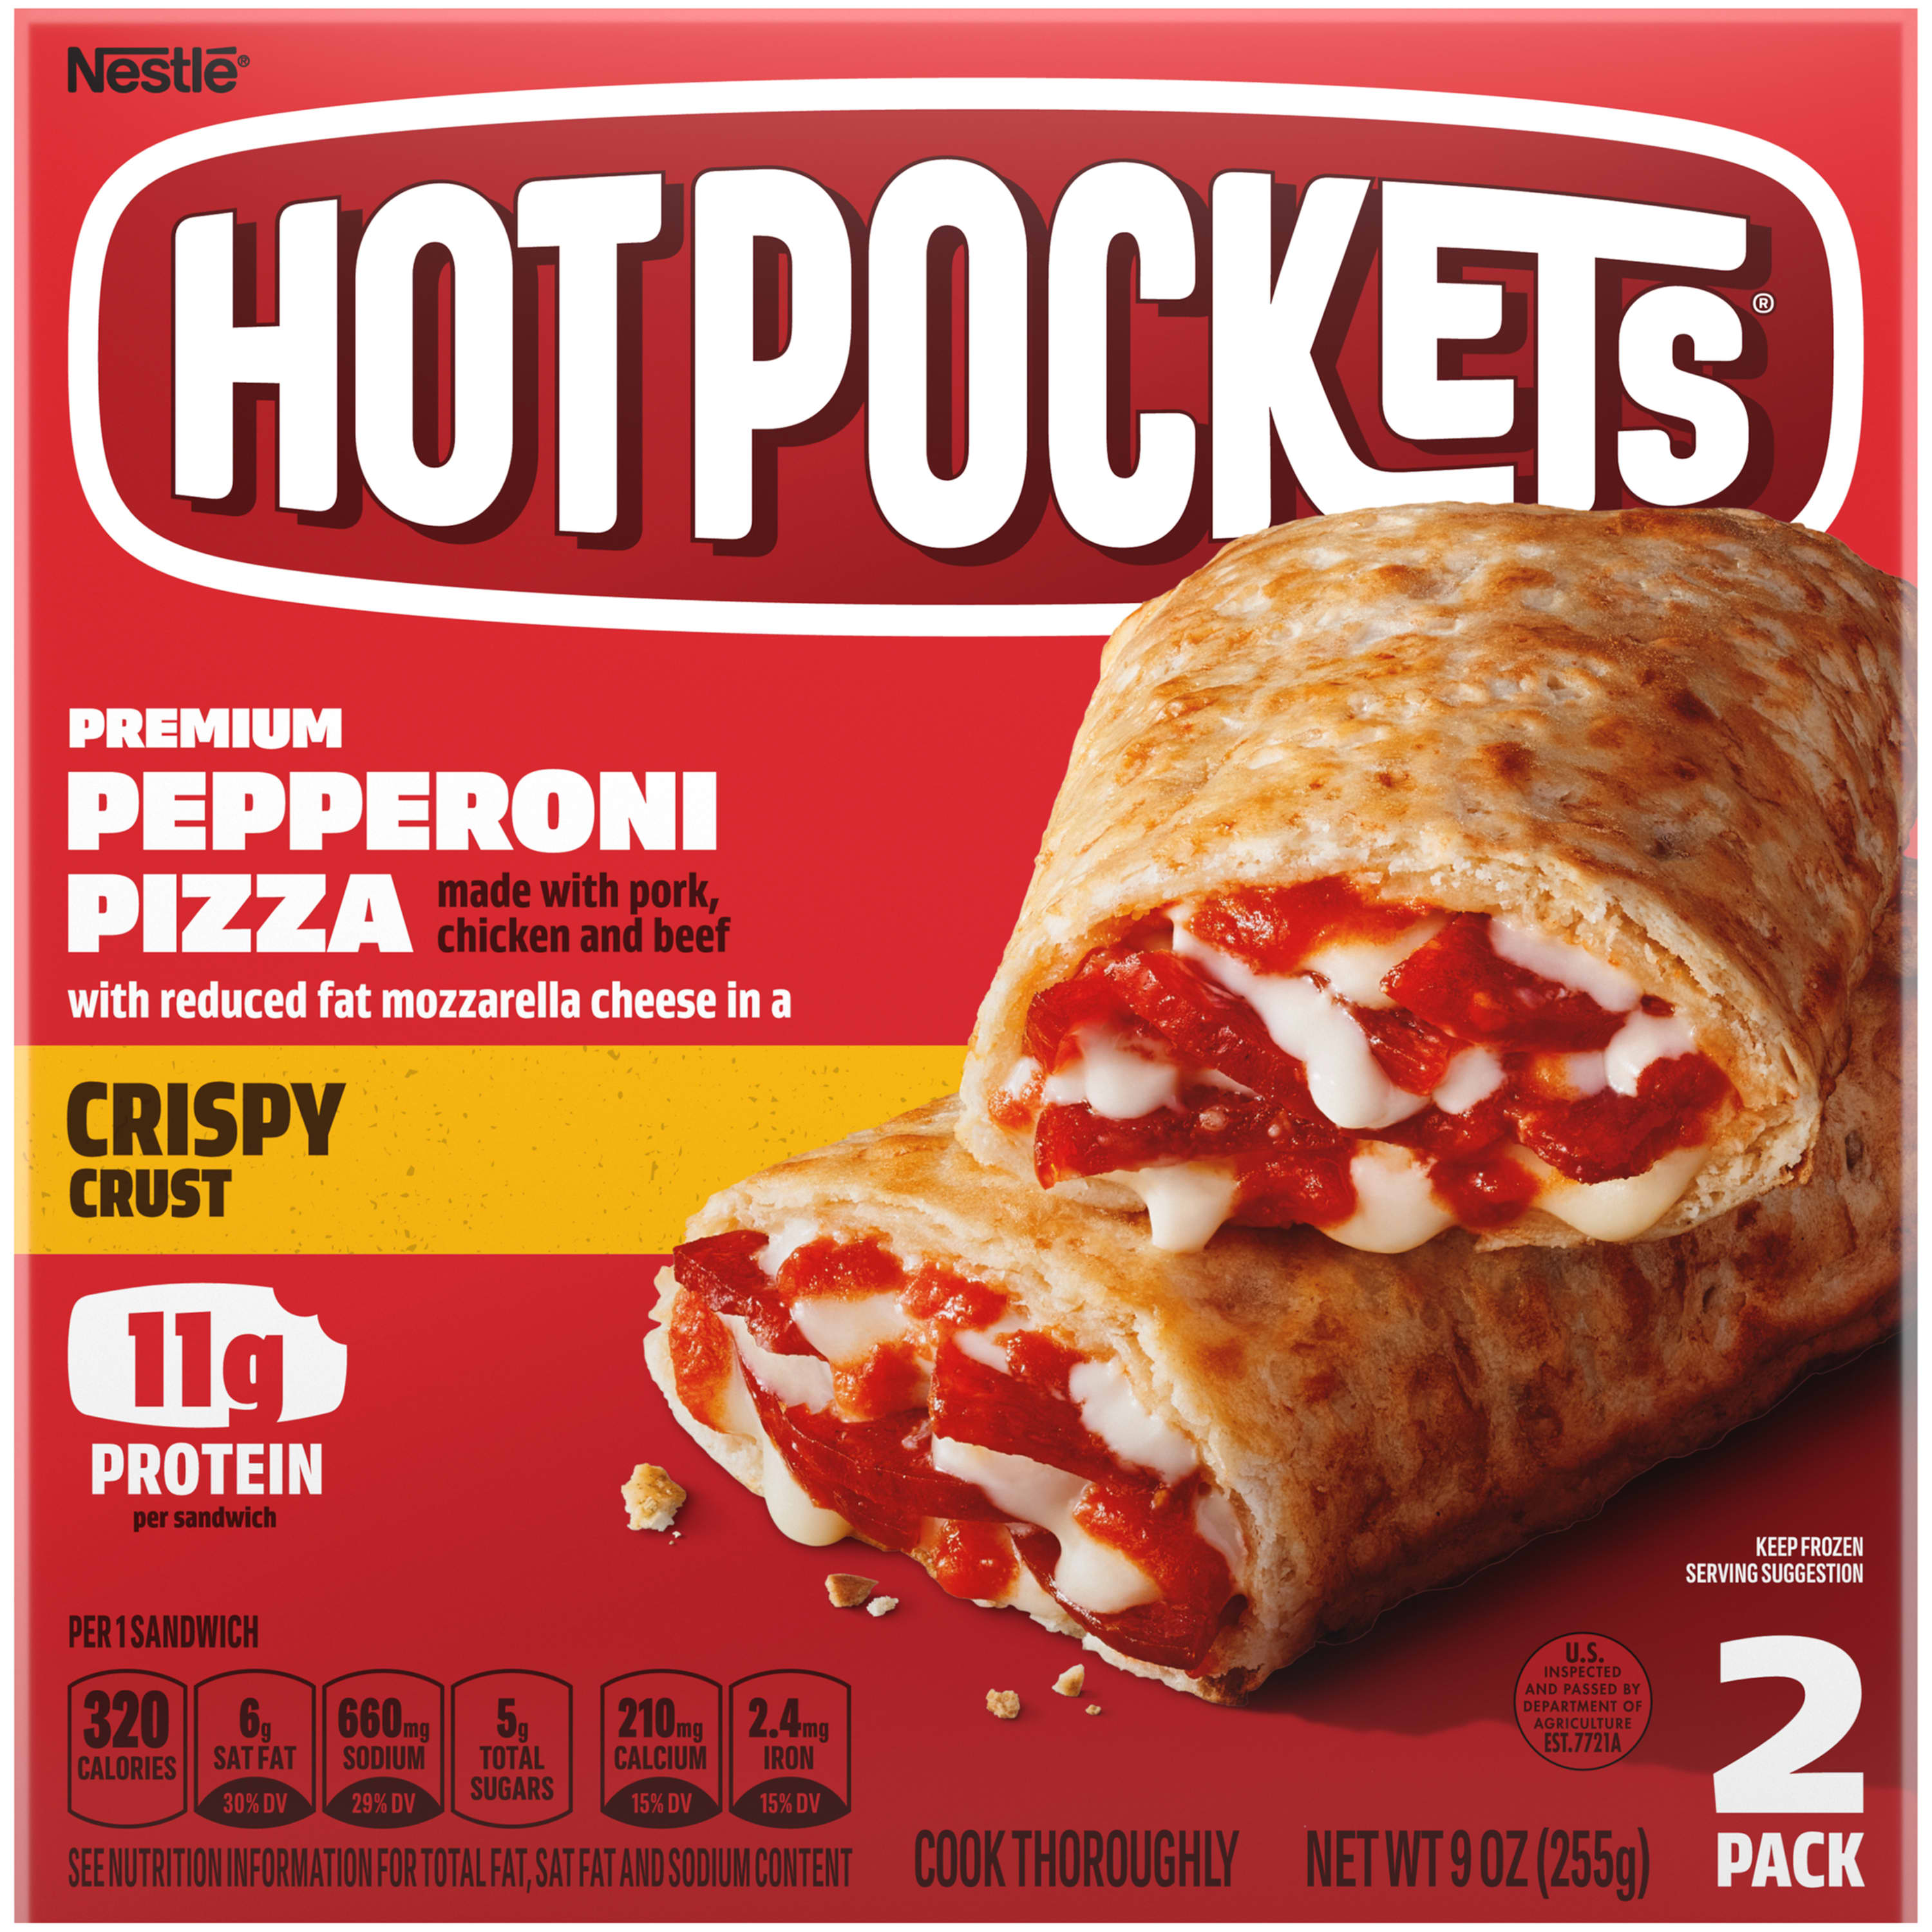 Hot Pockets recalled over potential glass and plastic contamination